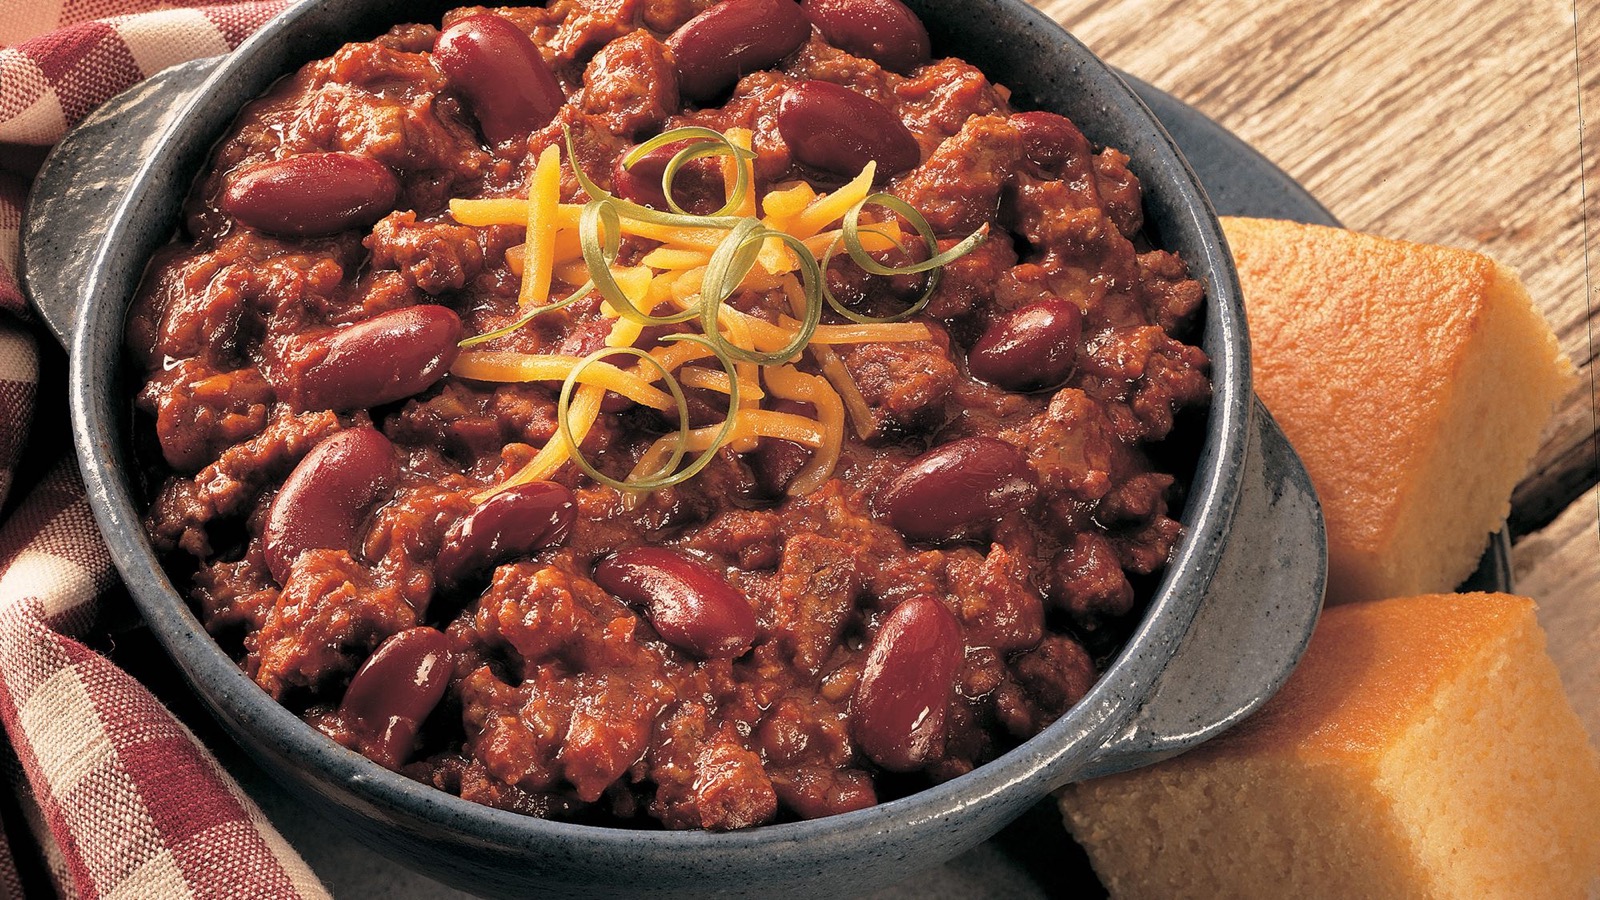 What Winter Comfort Food Are You? Chili